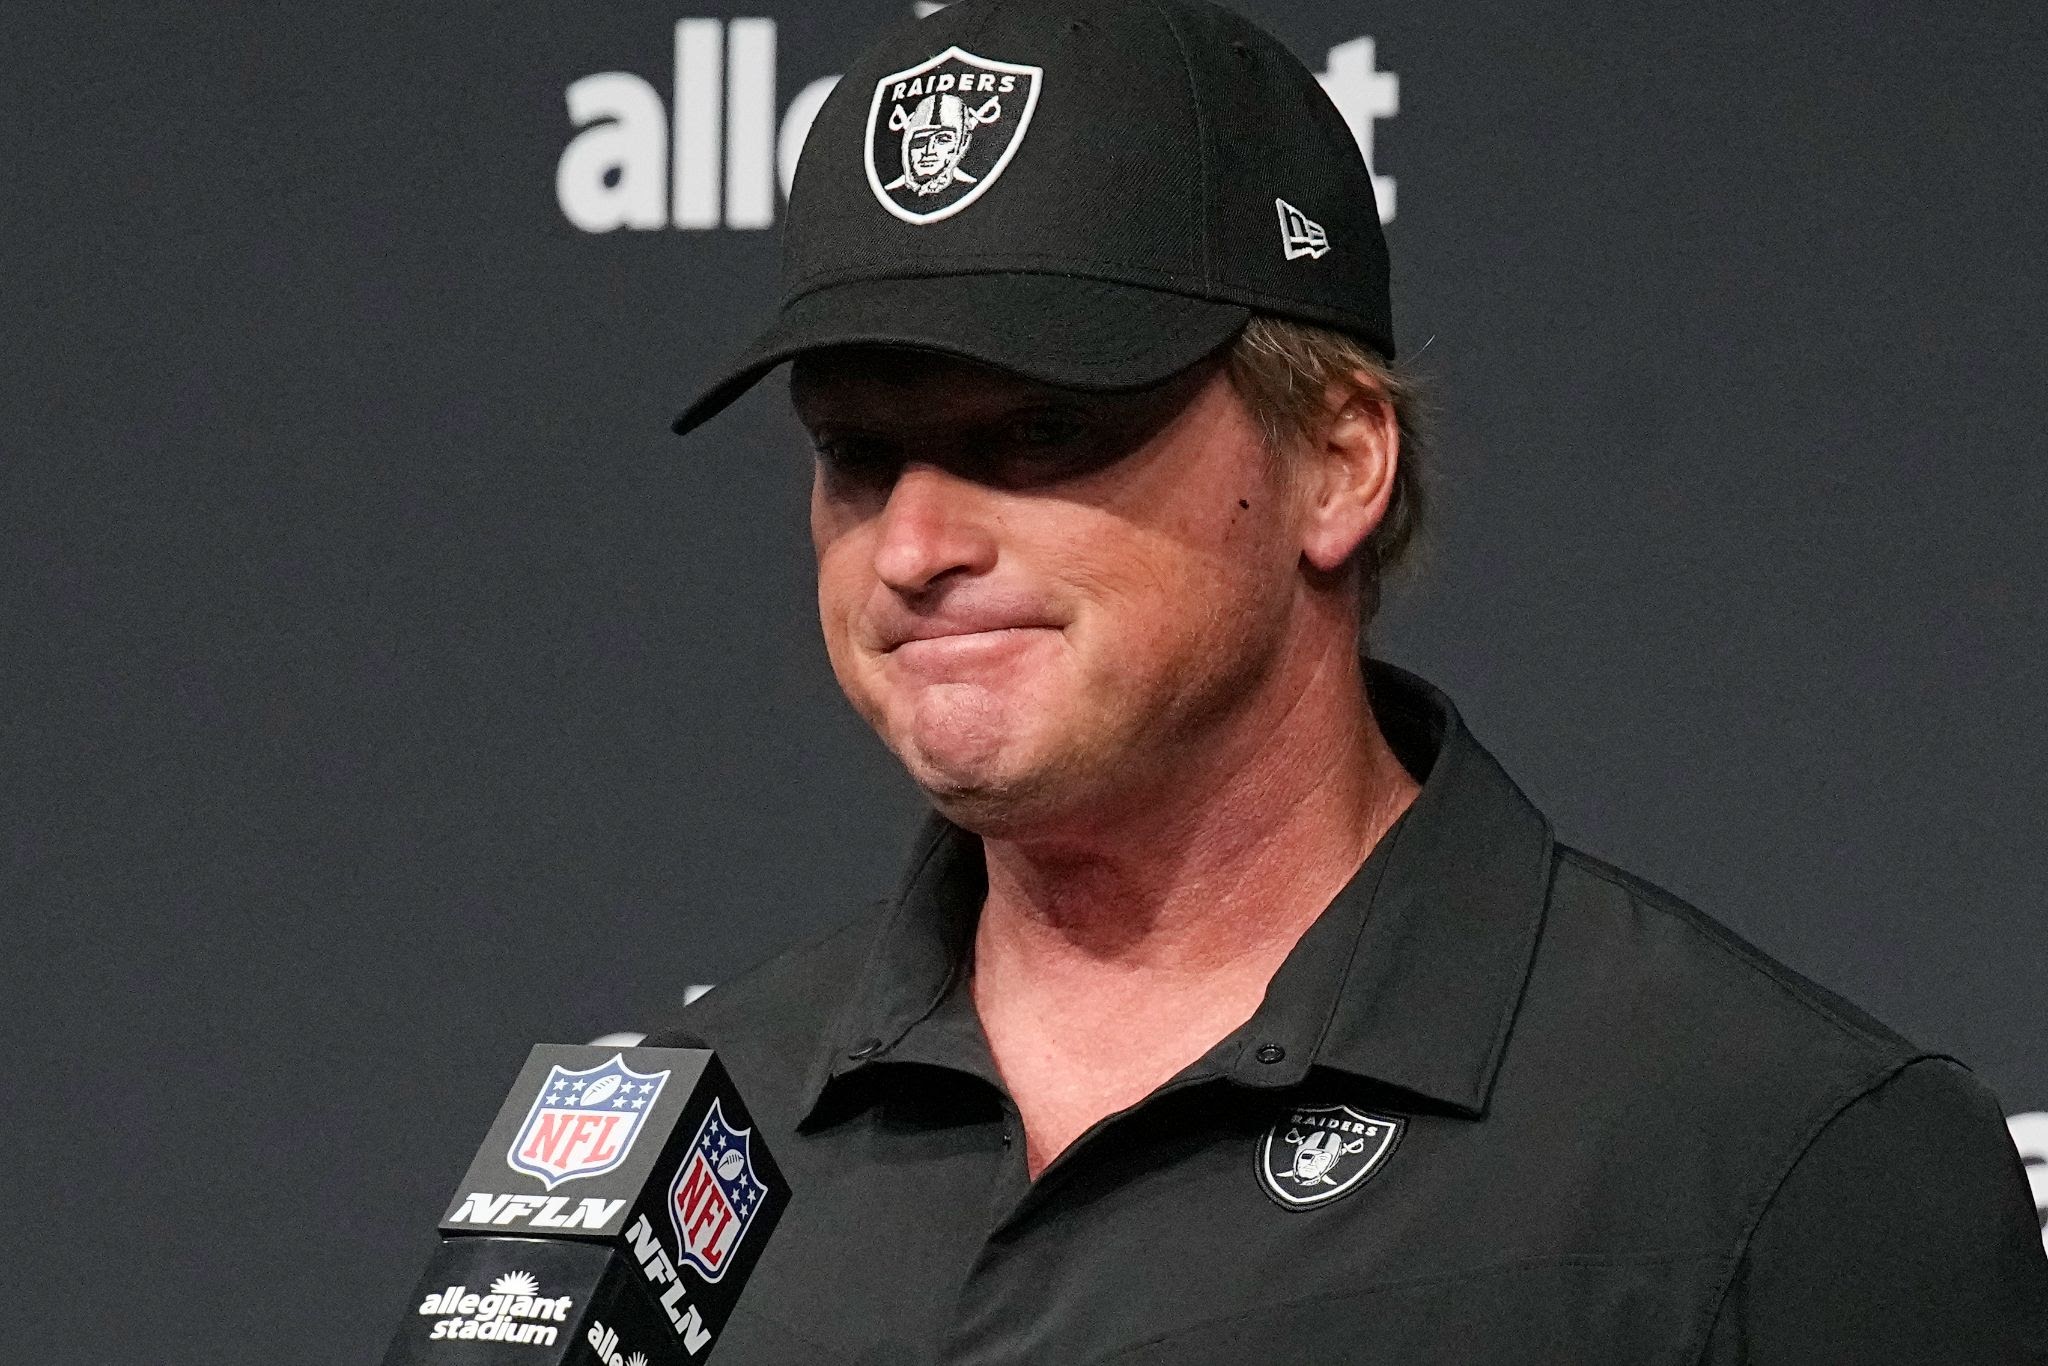 The Jon Gruden story continues to have fallout … and it's not over yet -  Poynter